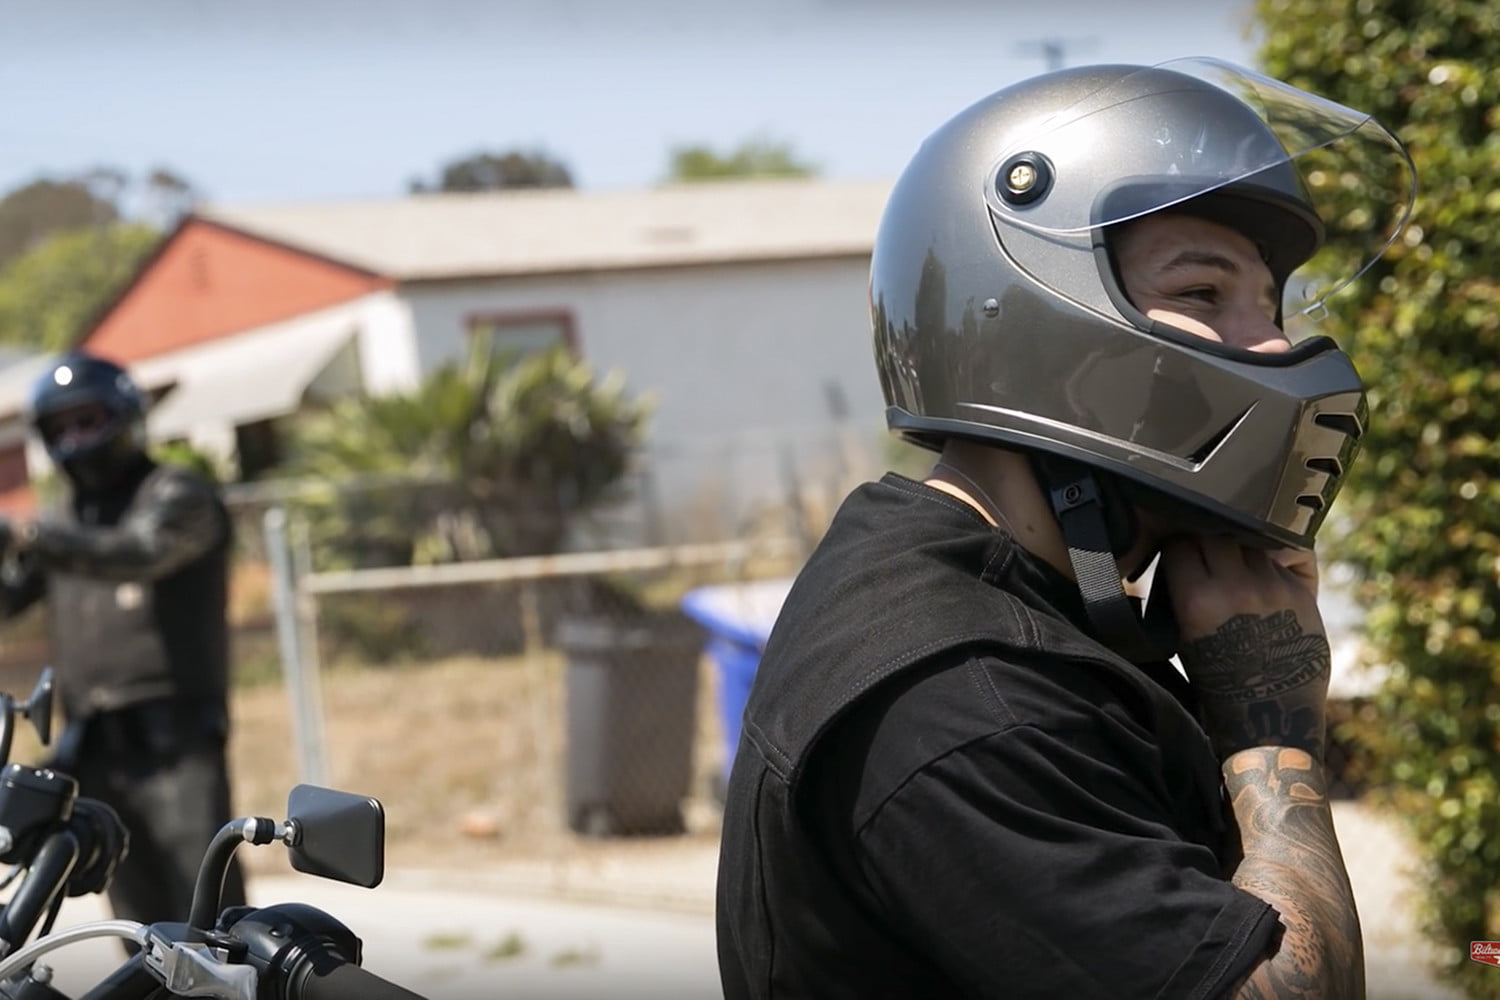 The 5 Best Quality Helmets for Motorbike Users.